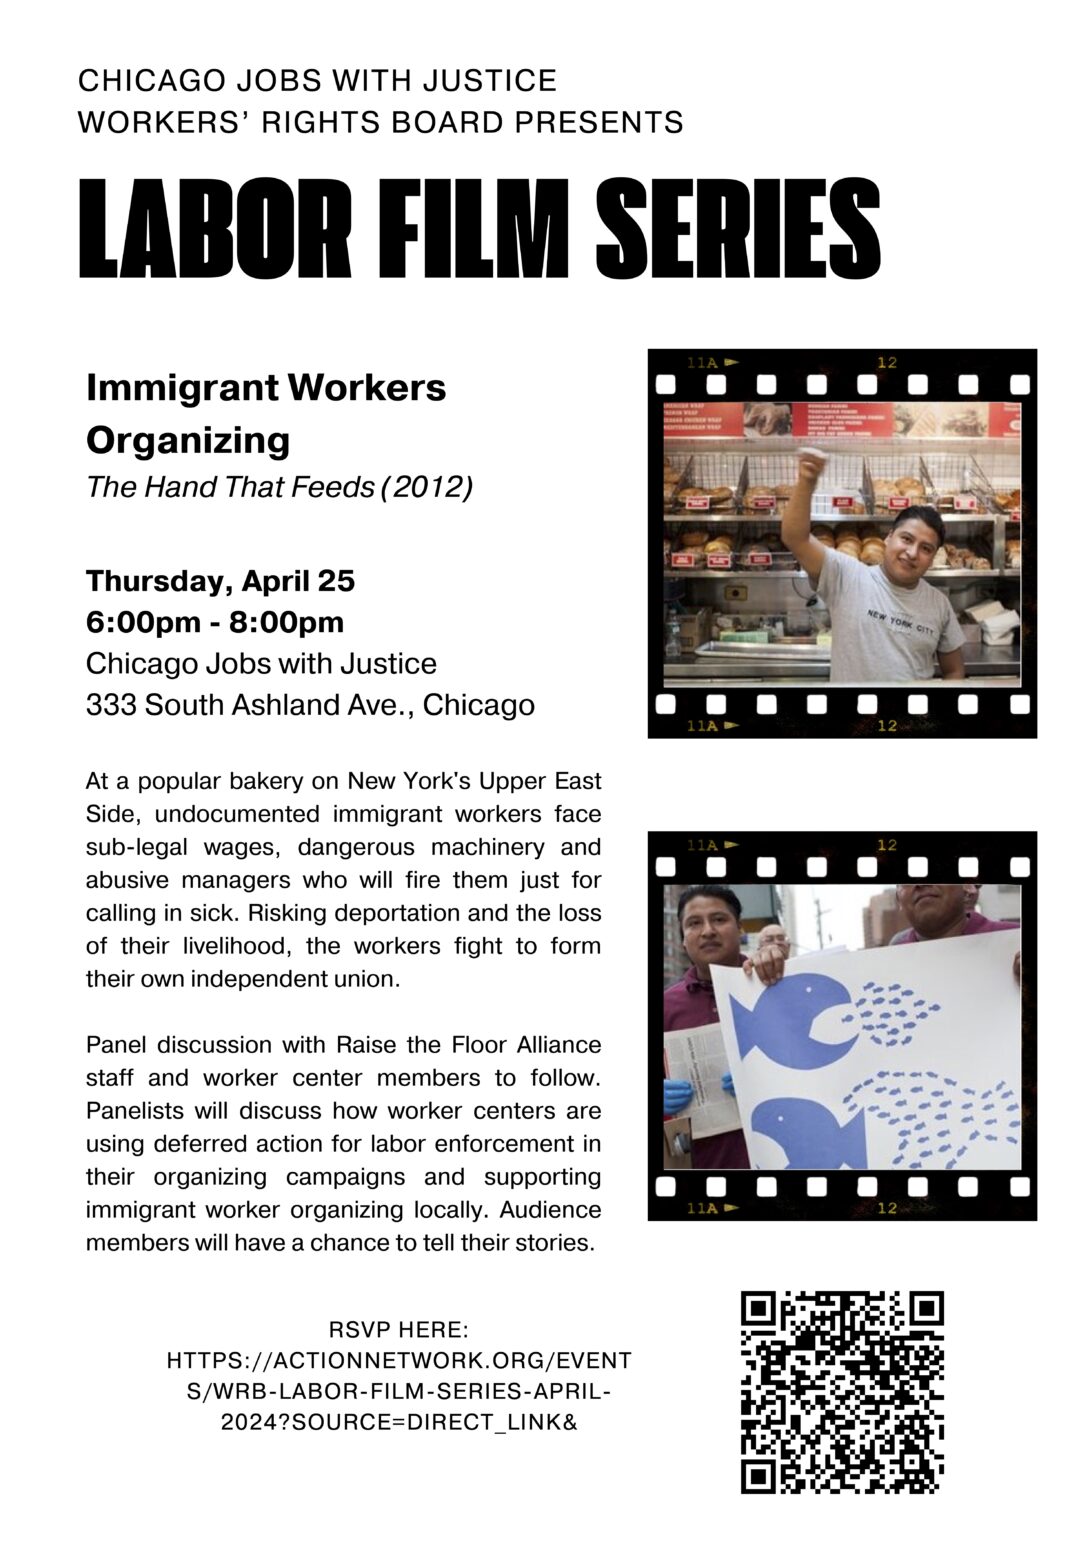 Event flyer featuring photos of latinx immigrant workers protesting.